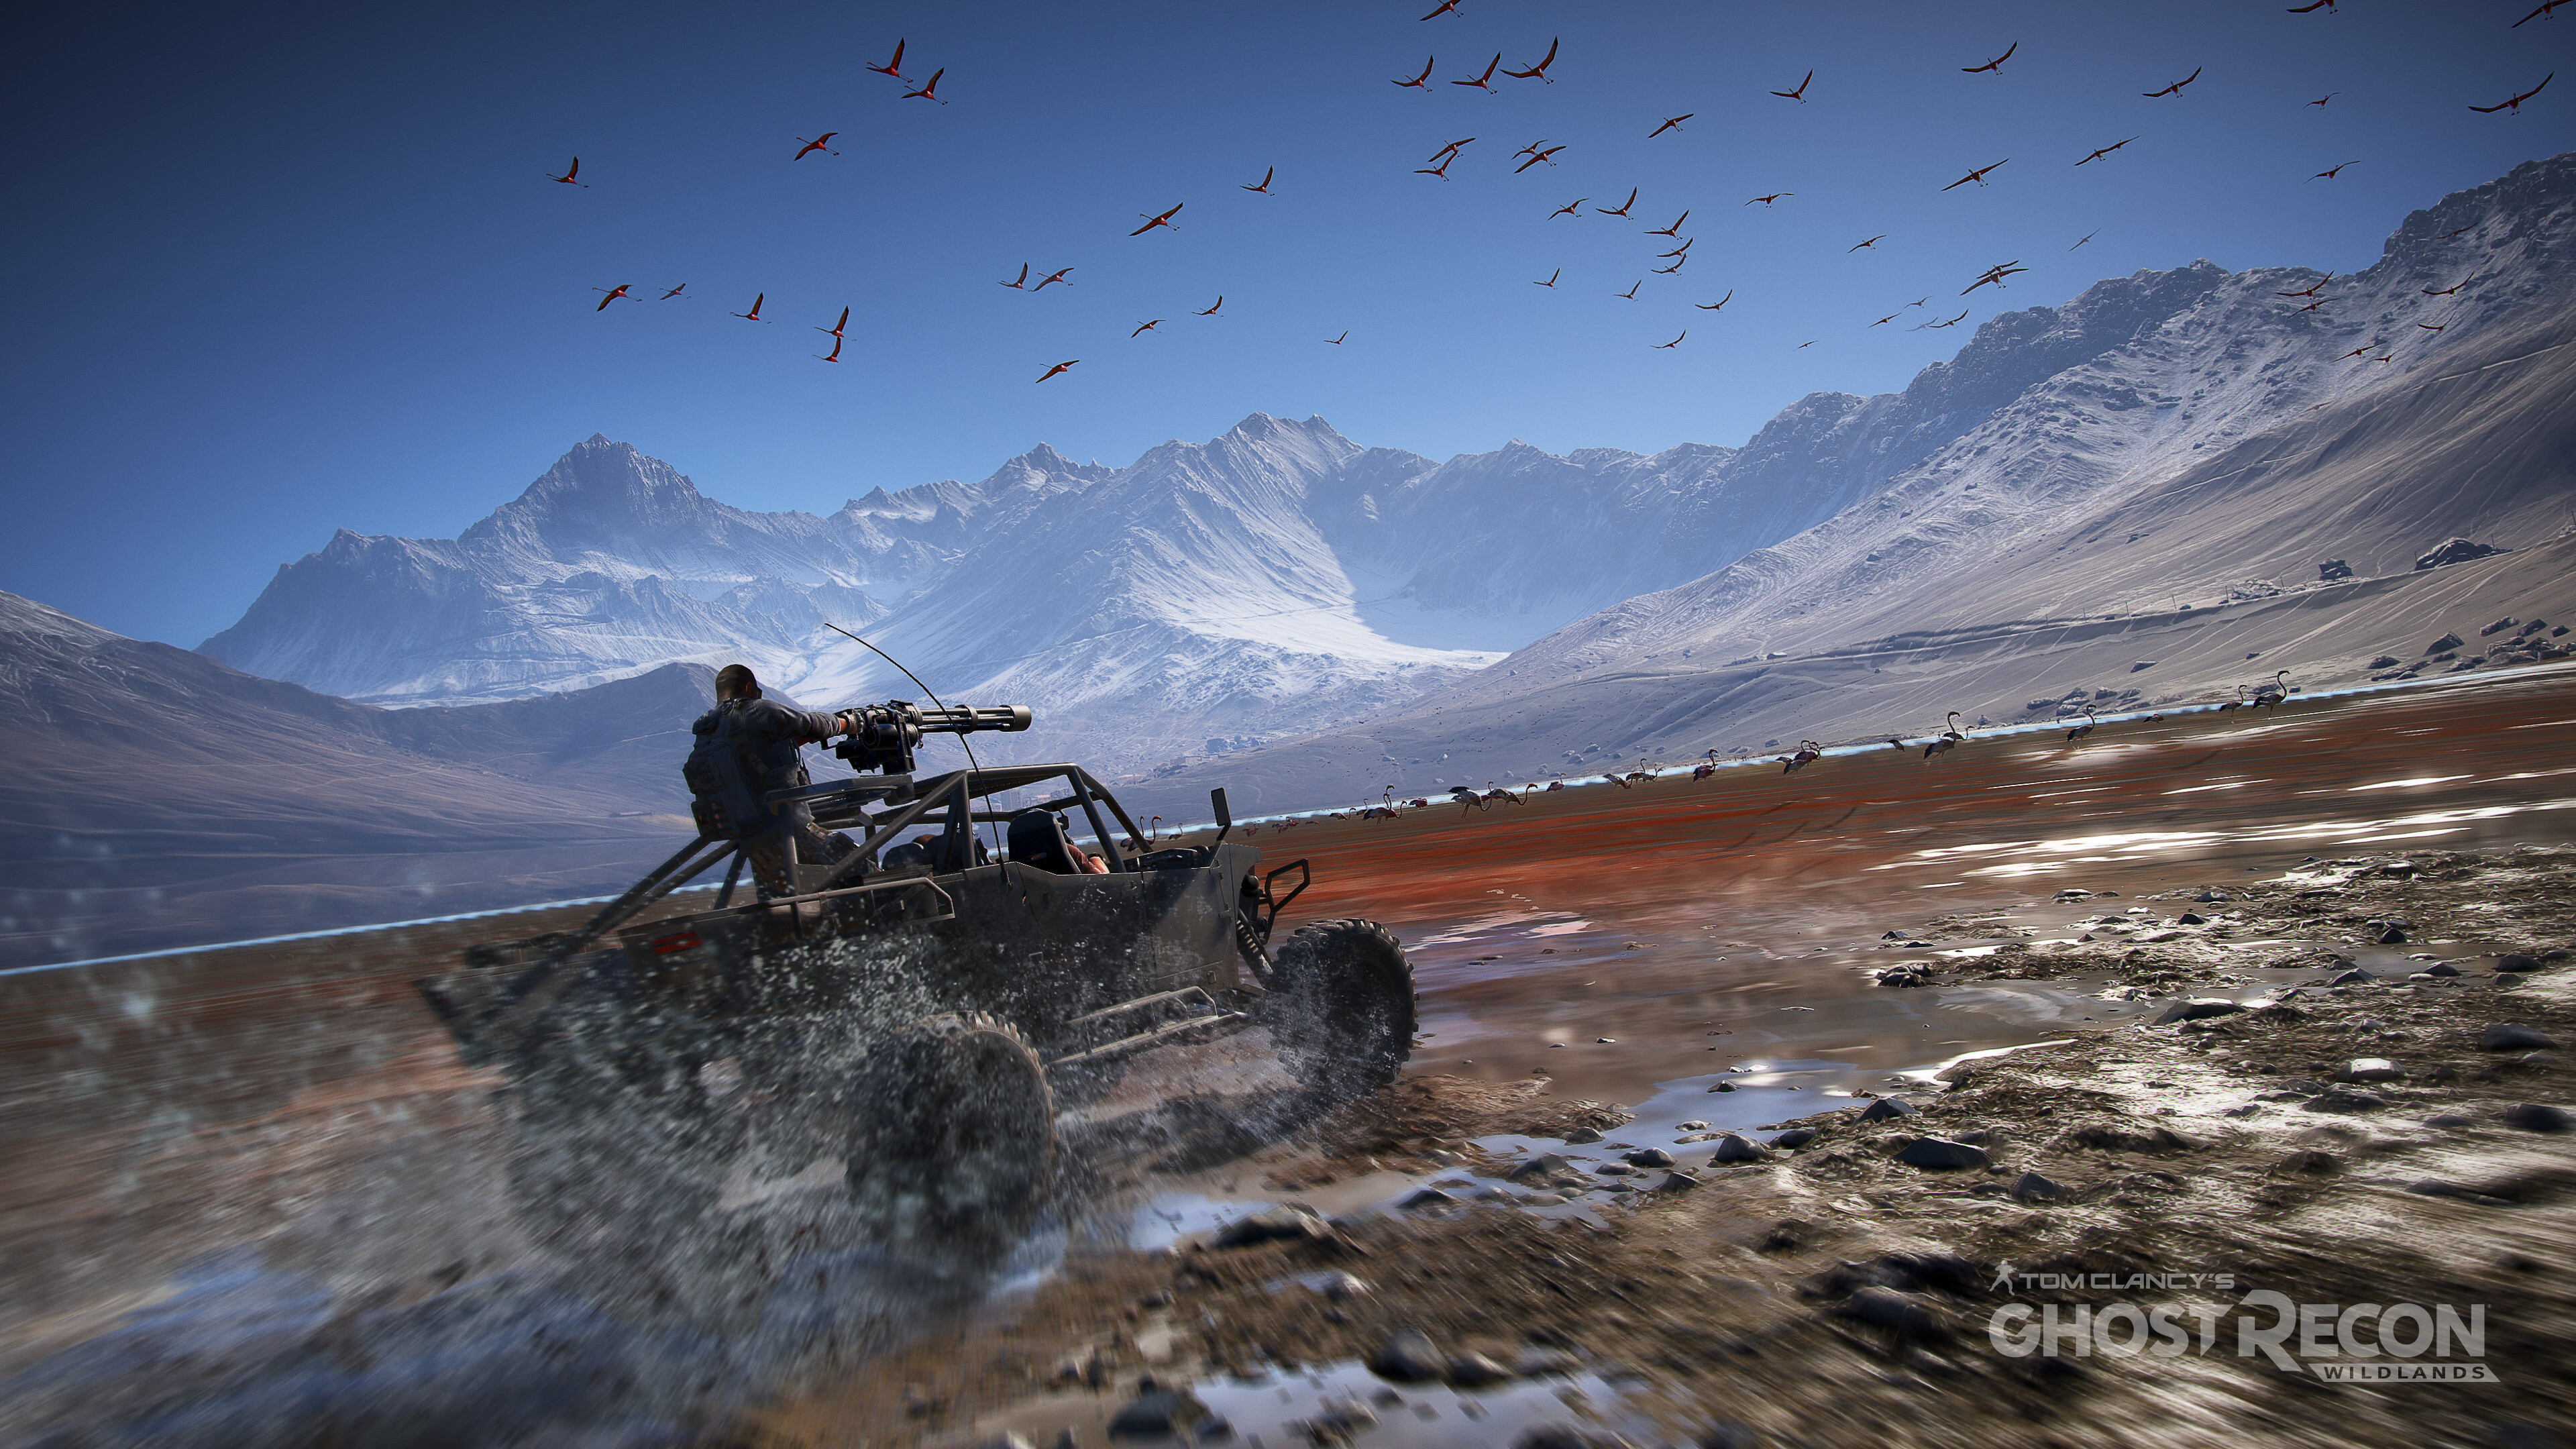 Ghost Recon: Wildlands: Fighting a Mexican drug cartel known as the Santa Blanca Cartel that has taken control over several parts of Bolivia. 3840x2160 4K Wallpaper.